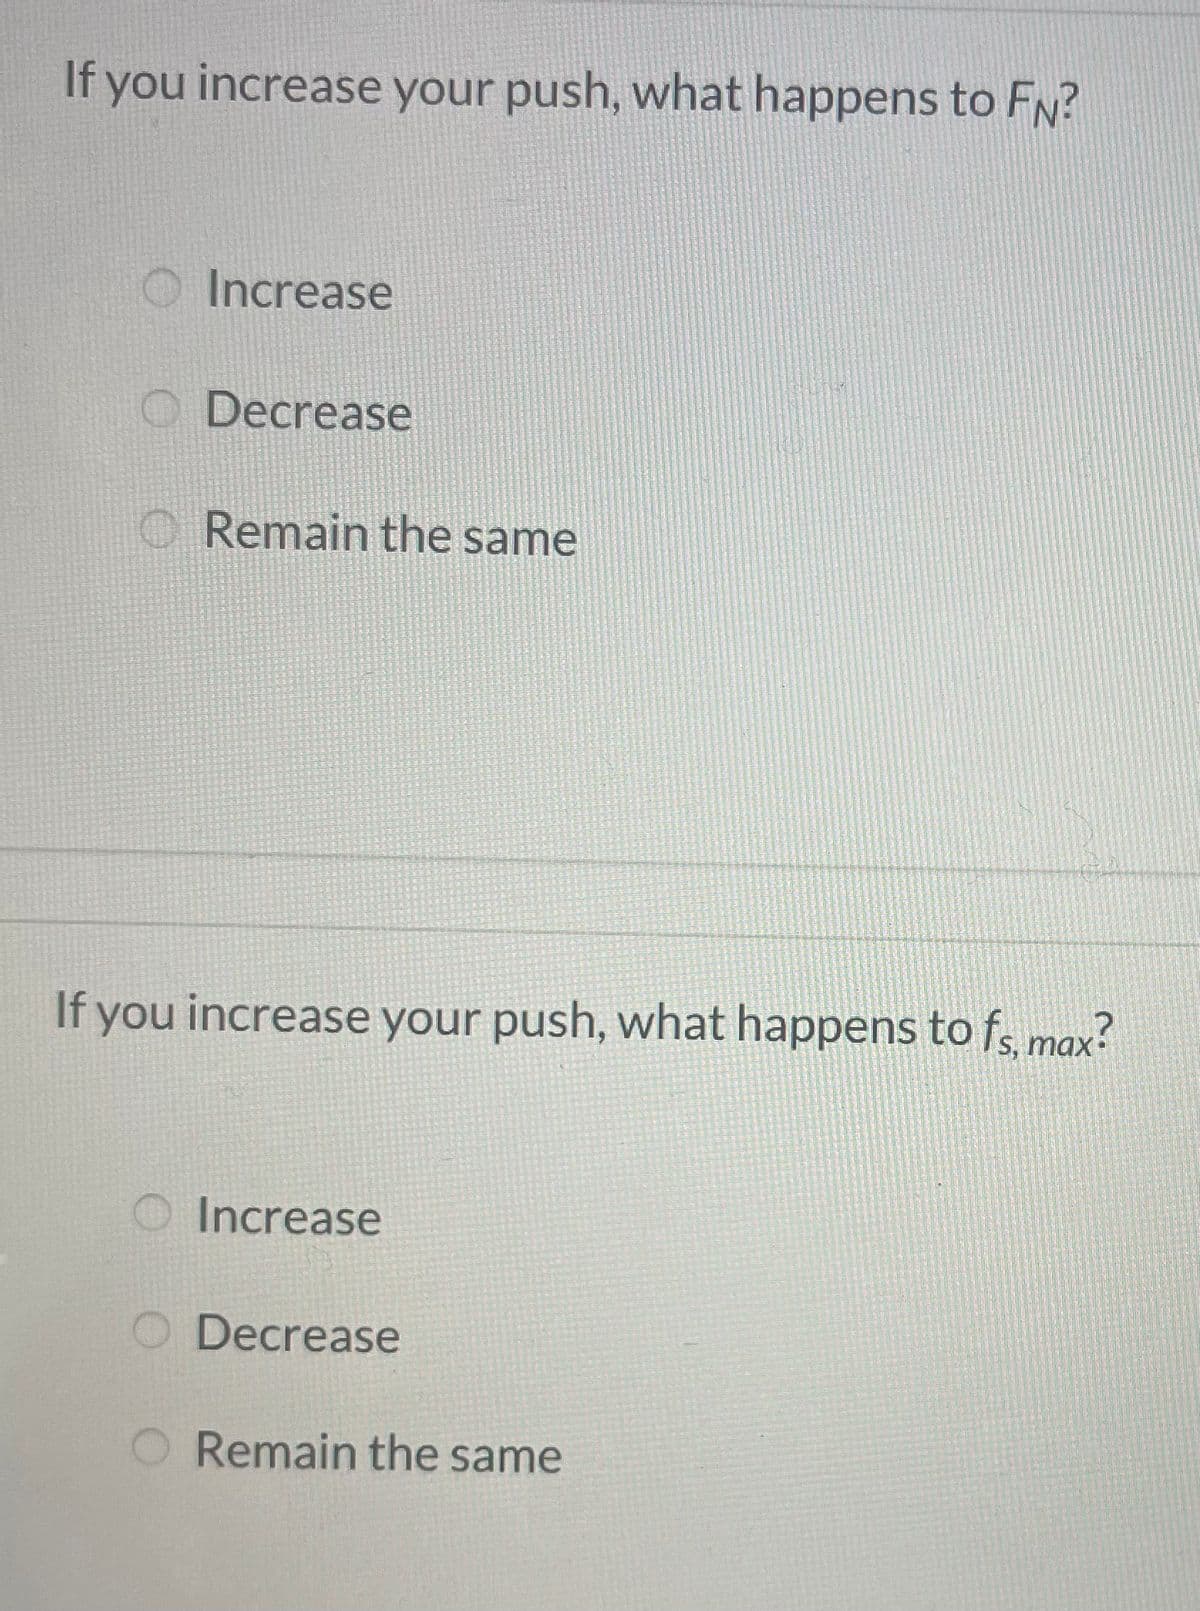 If you increase your push, what happens to FN?
O Increase
O Decrease
O Remain the same
If you increase your push, what happens to f, max?
O Increase
Decrease
Remain the same
